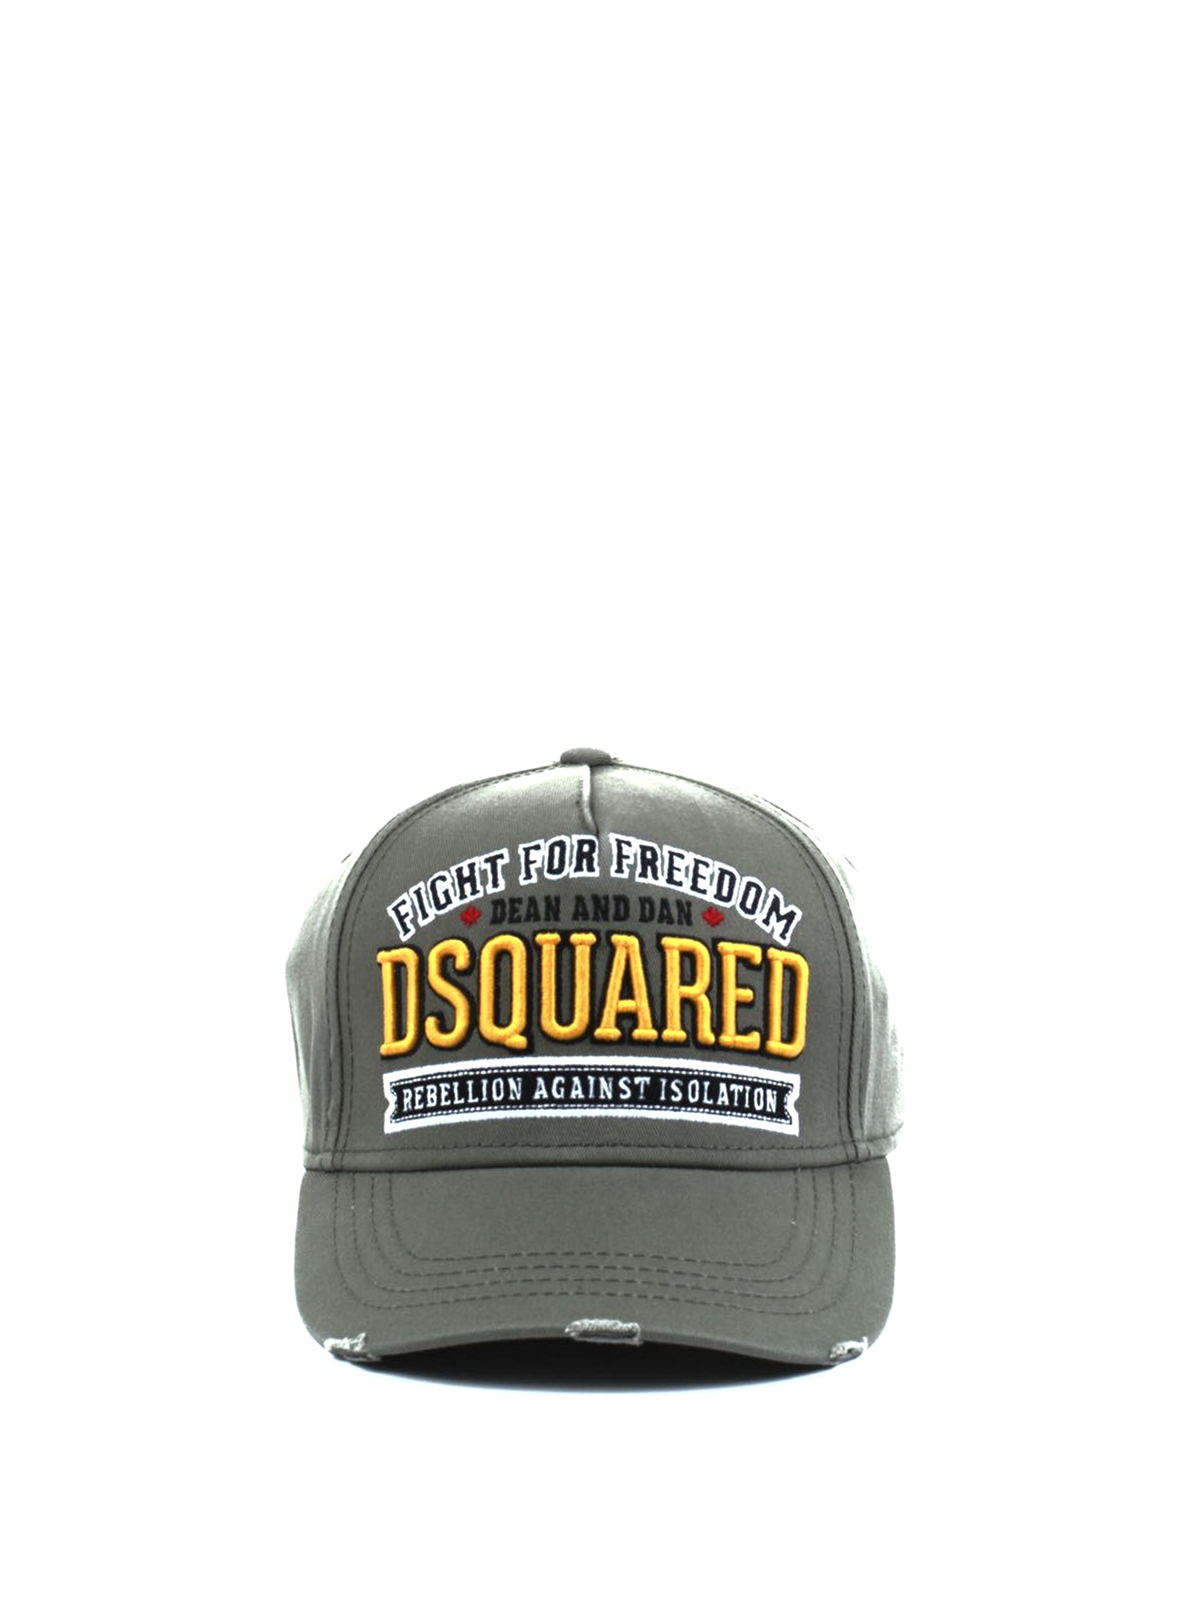 dsquared2 fight for freedom